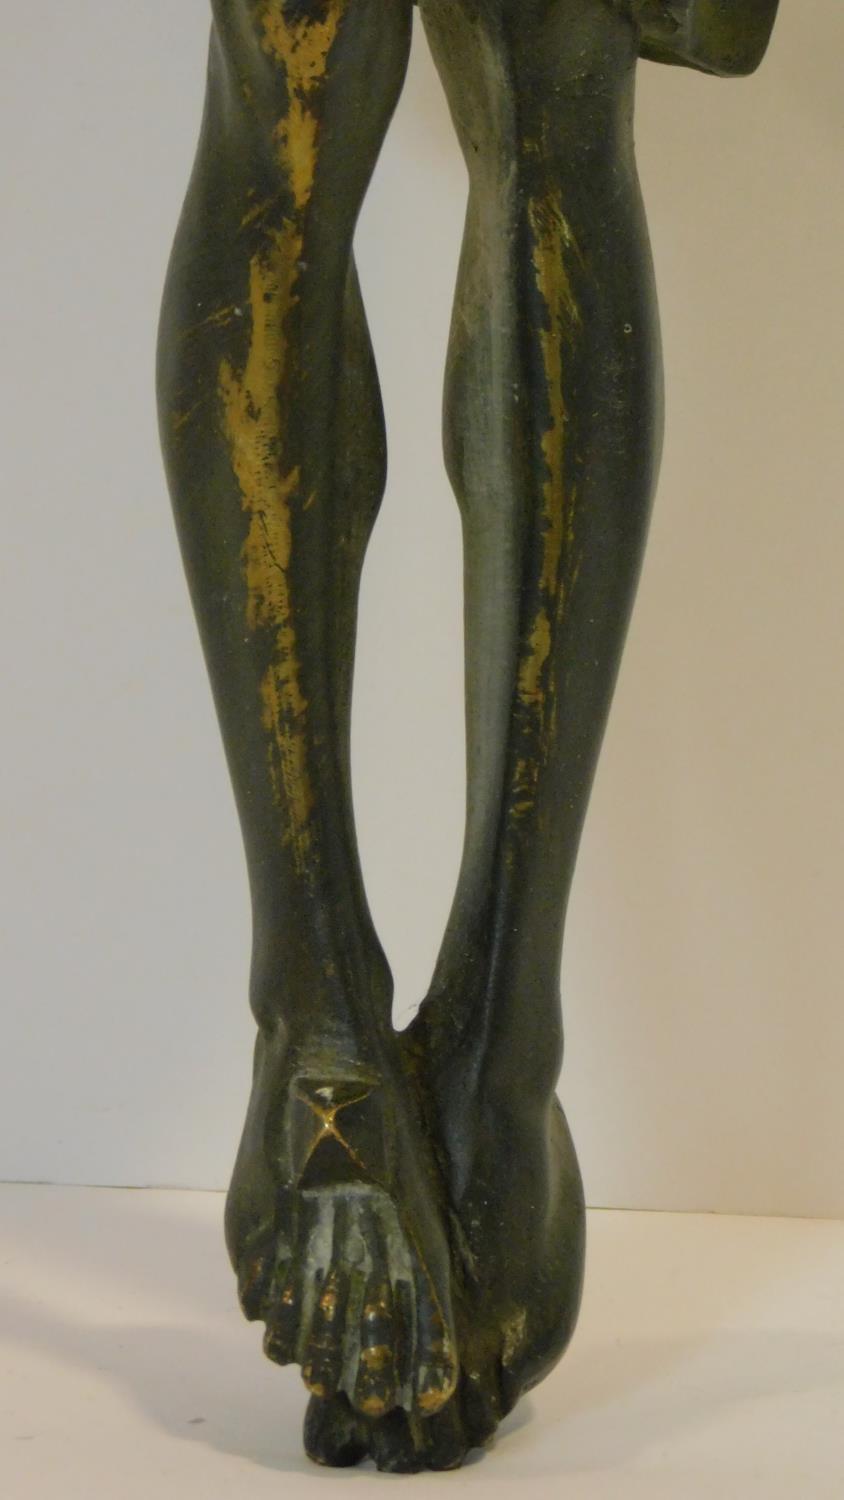 A patinated brass figure of the Crucifixion, intricately detailed. H.48cm - Image 5 of 6